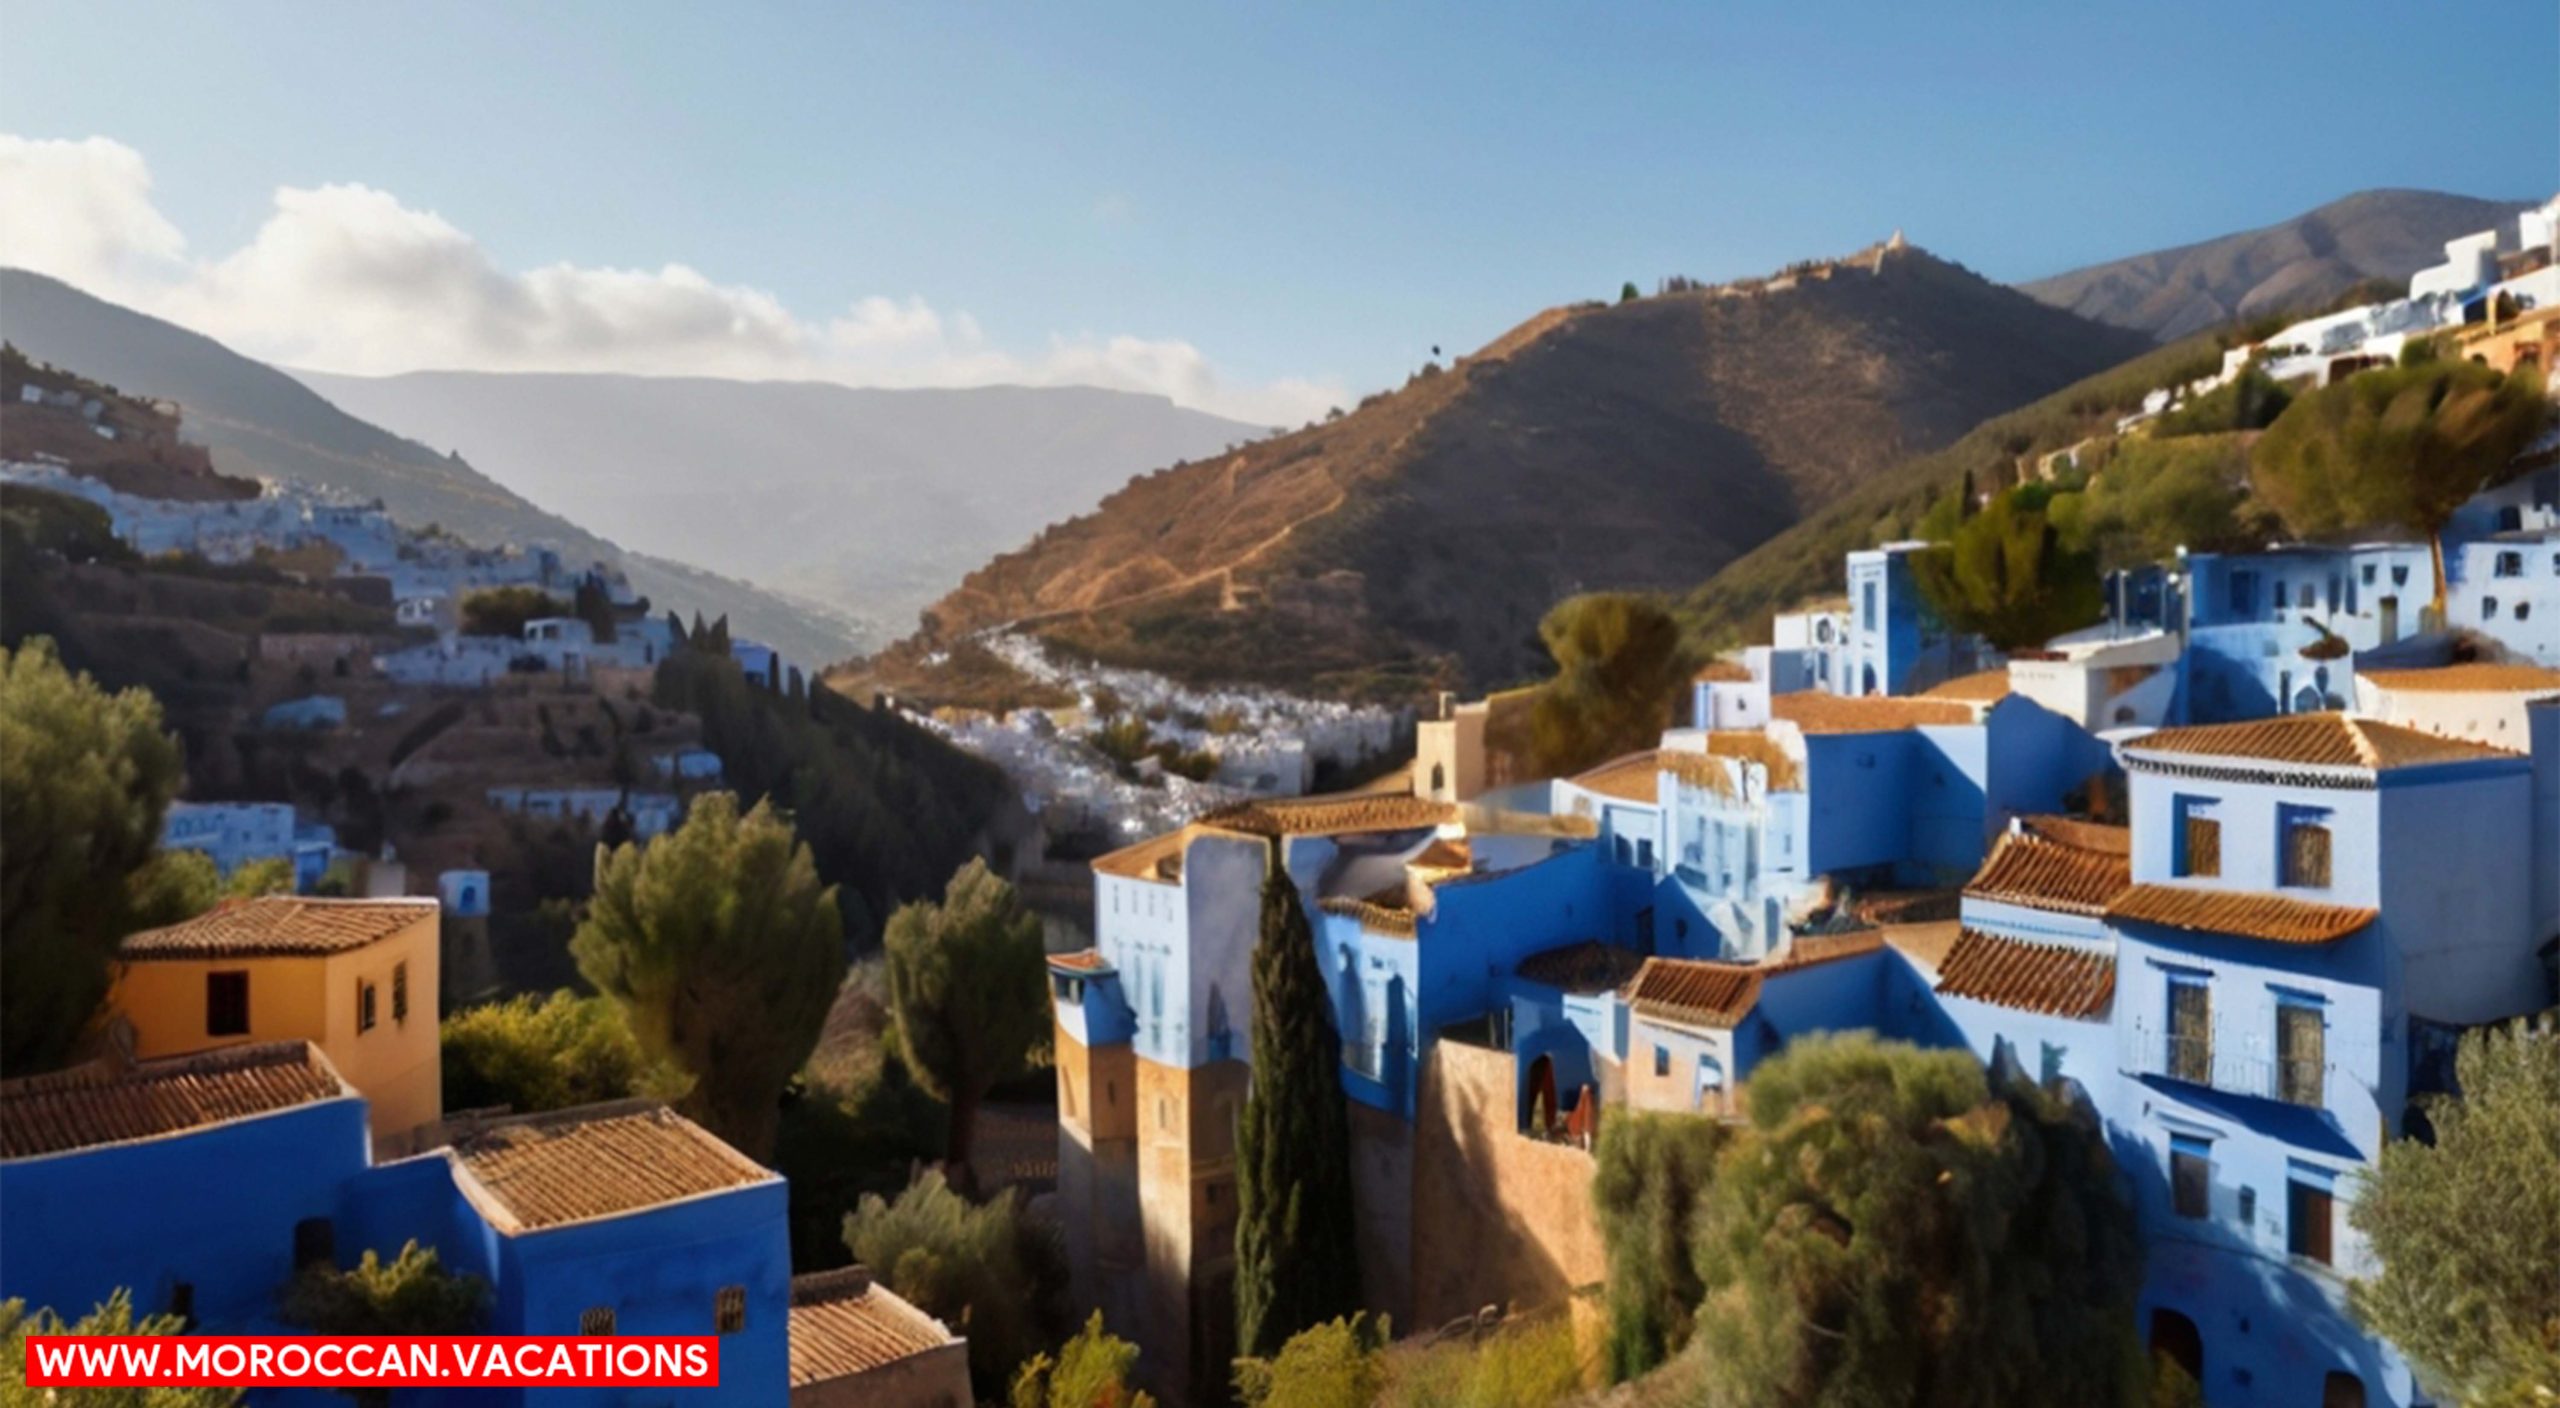 An image of beautiful aerial view of chefchaouen.